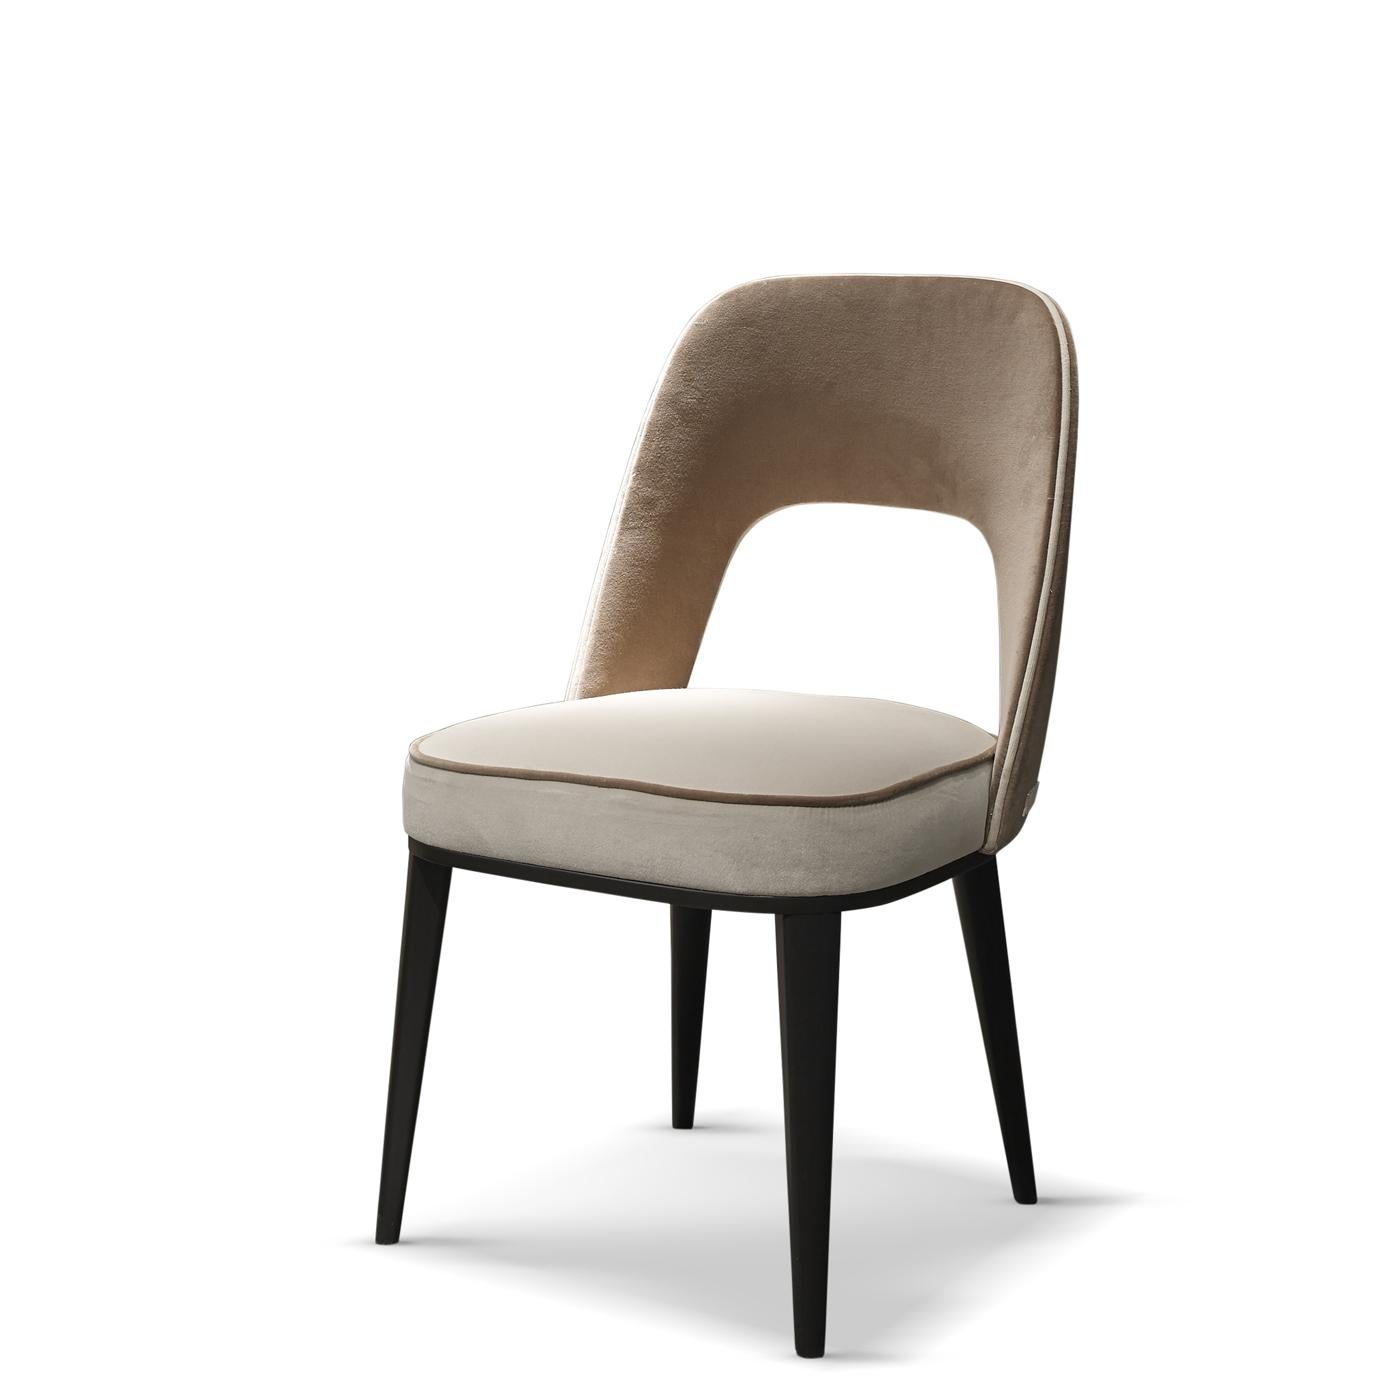 This elegant chair is an ideal addition to a modern dining room, where its clean Silhouette and elegant finishing will make a refined statement piece. The mixed solid wood and plywood structure is padded with multi-density polyurethane foam for a